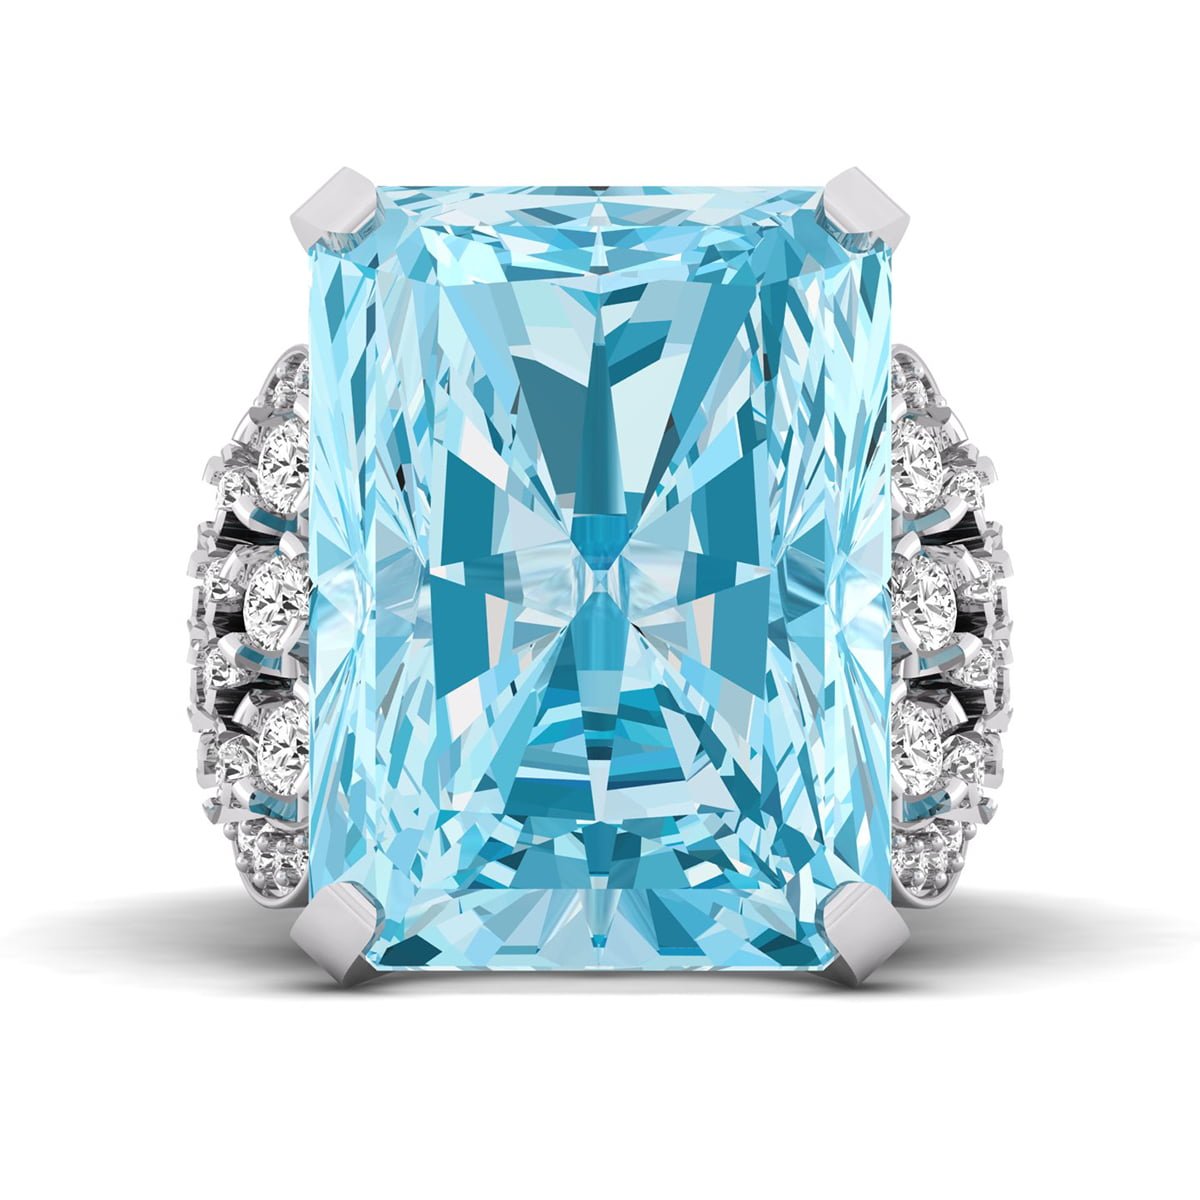 Aquamarine Emerald With Round White CZ Stone Cocktail Ring For Any Occasion